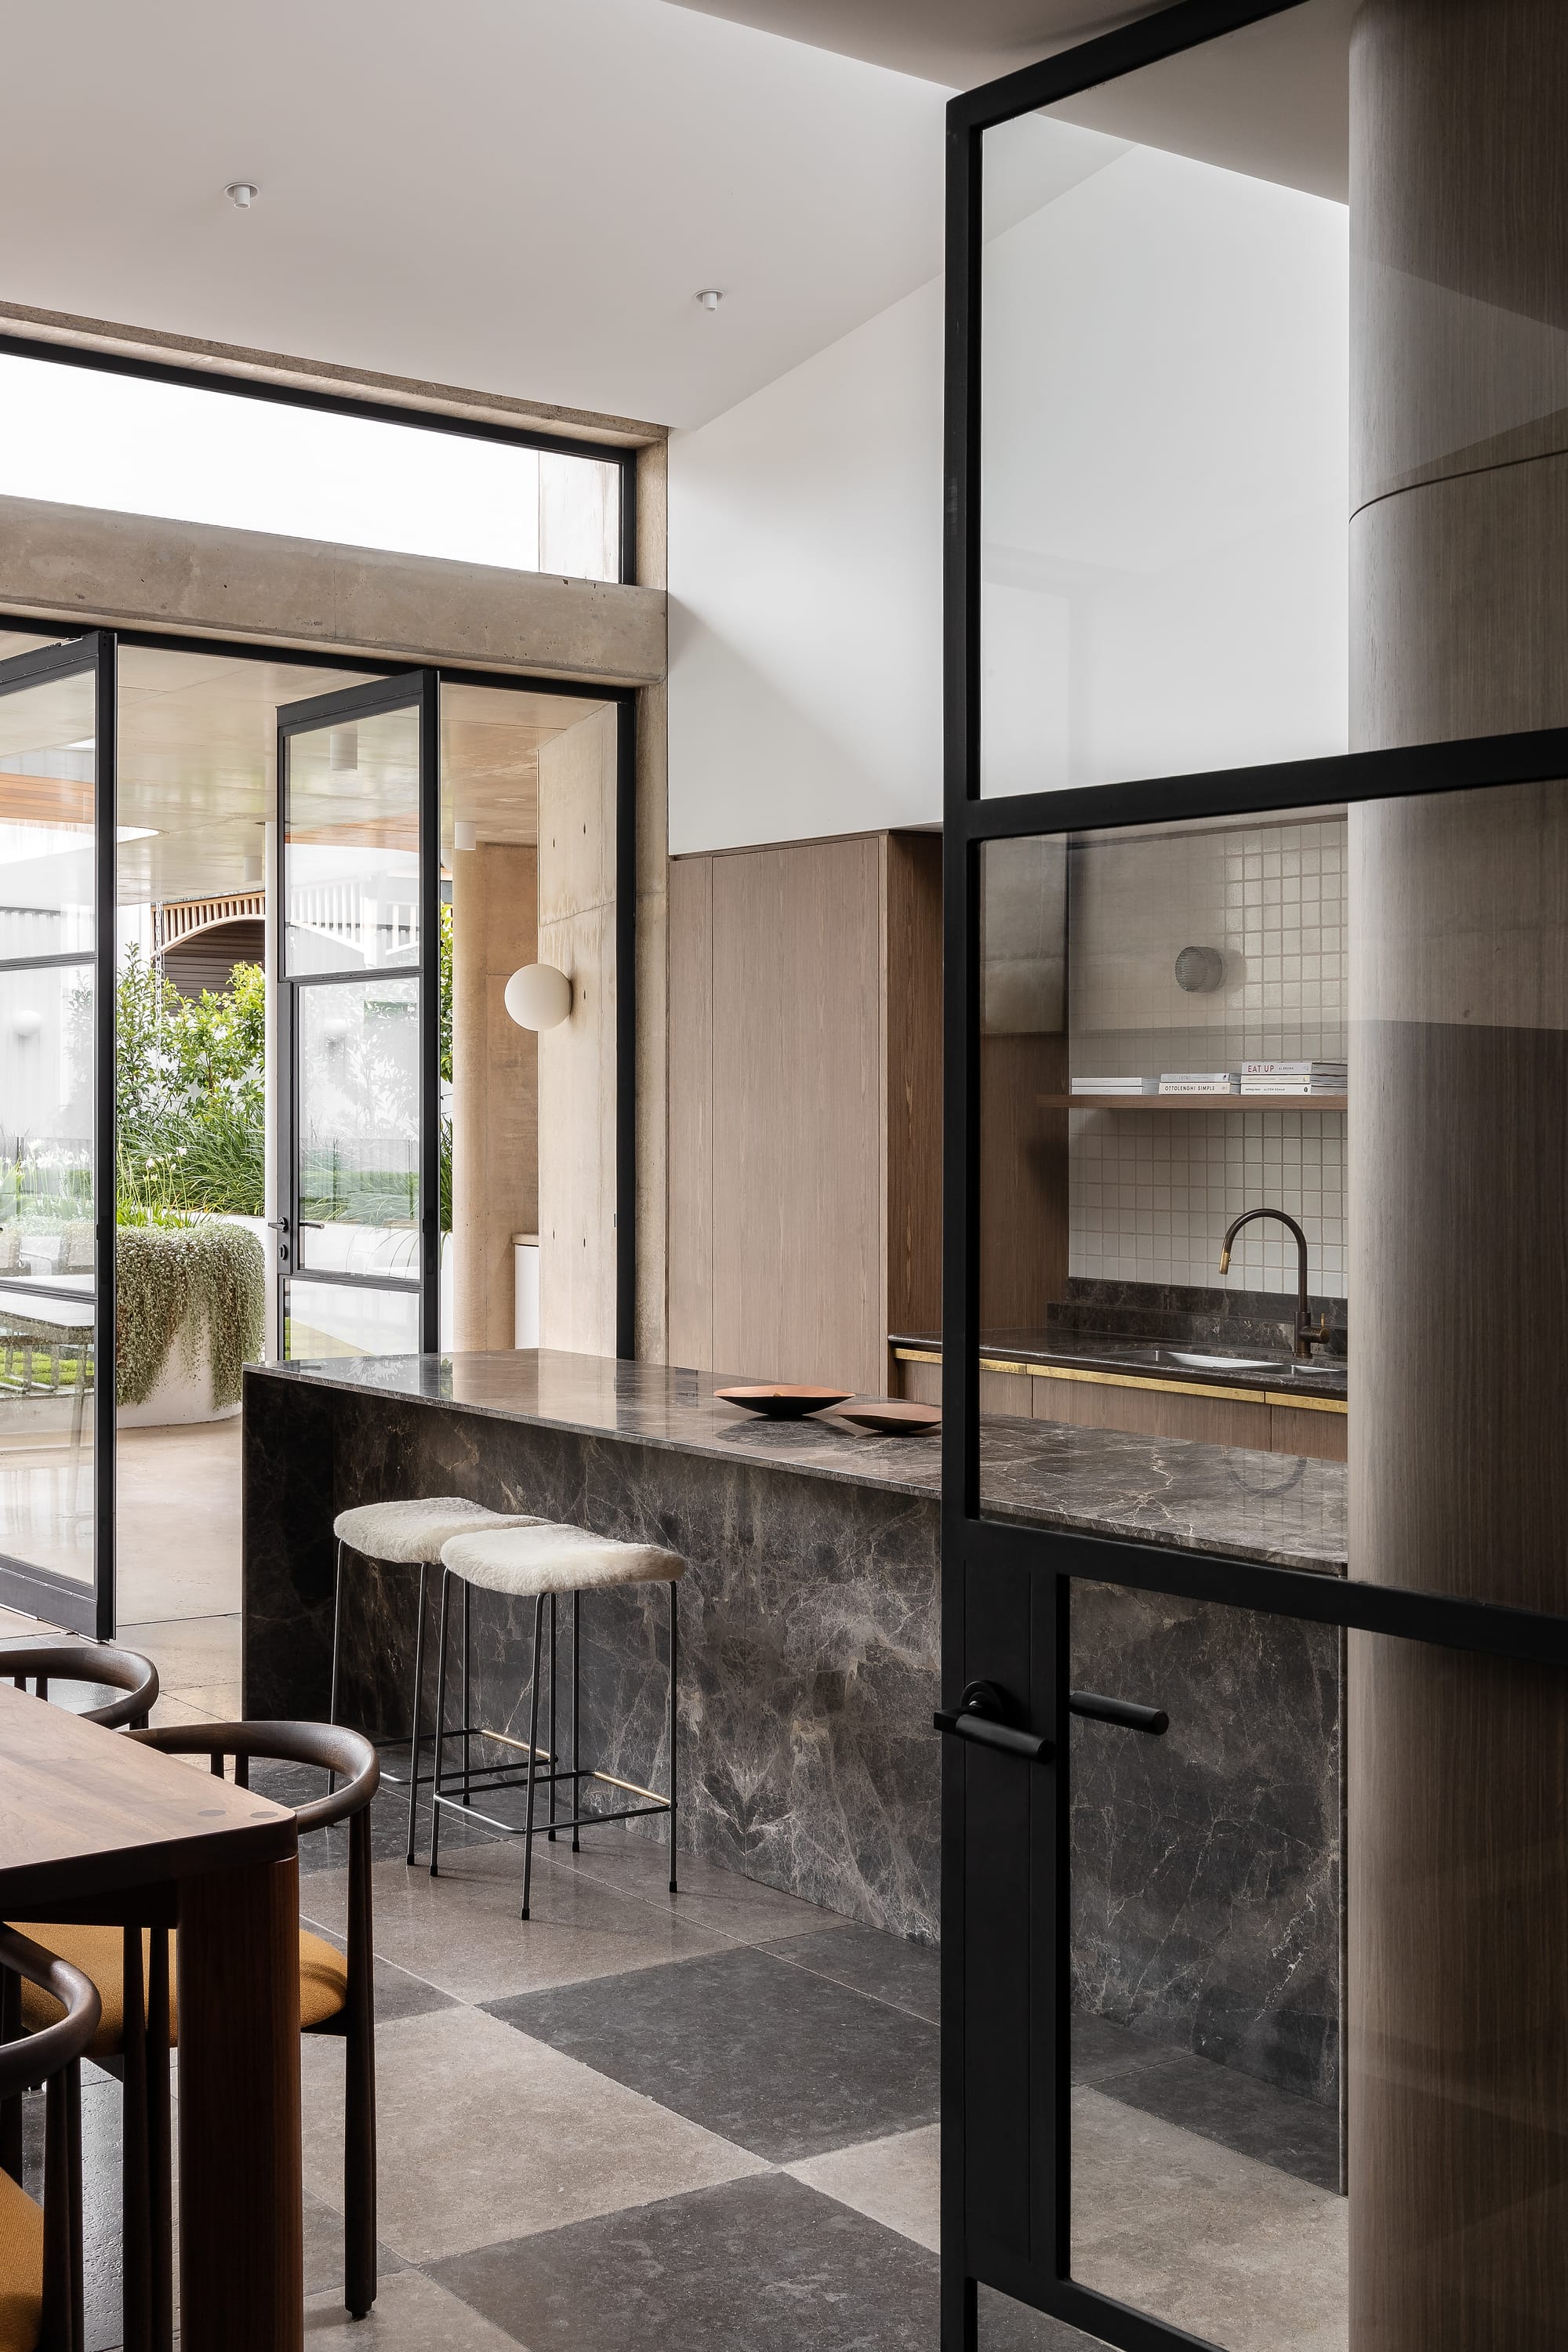 Rose Park by studio gram. Photography by Timothy Ross. Dark grey stone counters and countertops in kitchen. Black framed glass doors open onto undercover patio. Checkered floor tiles. 